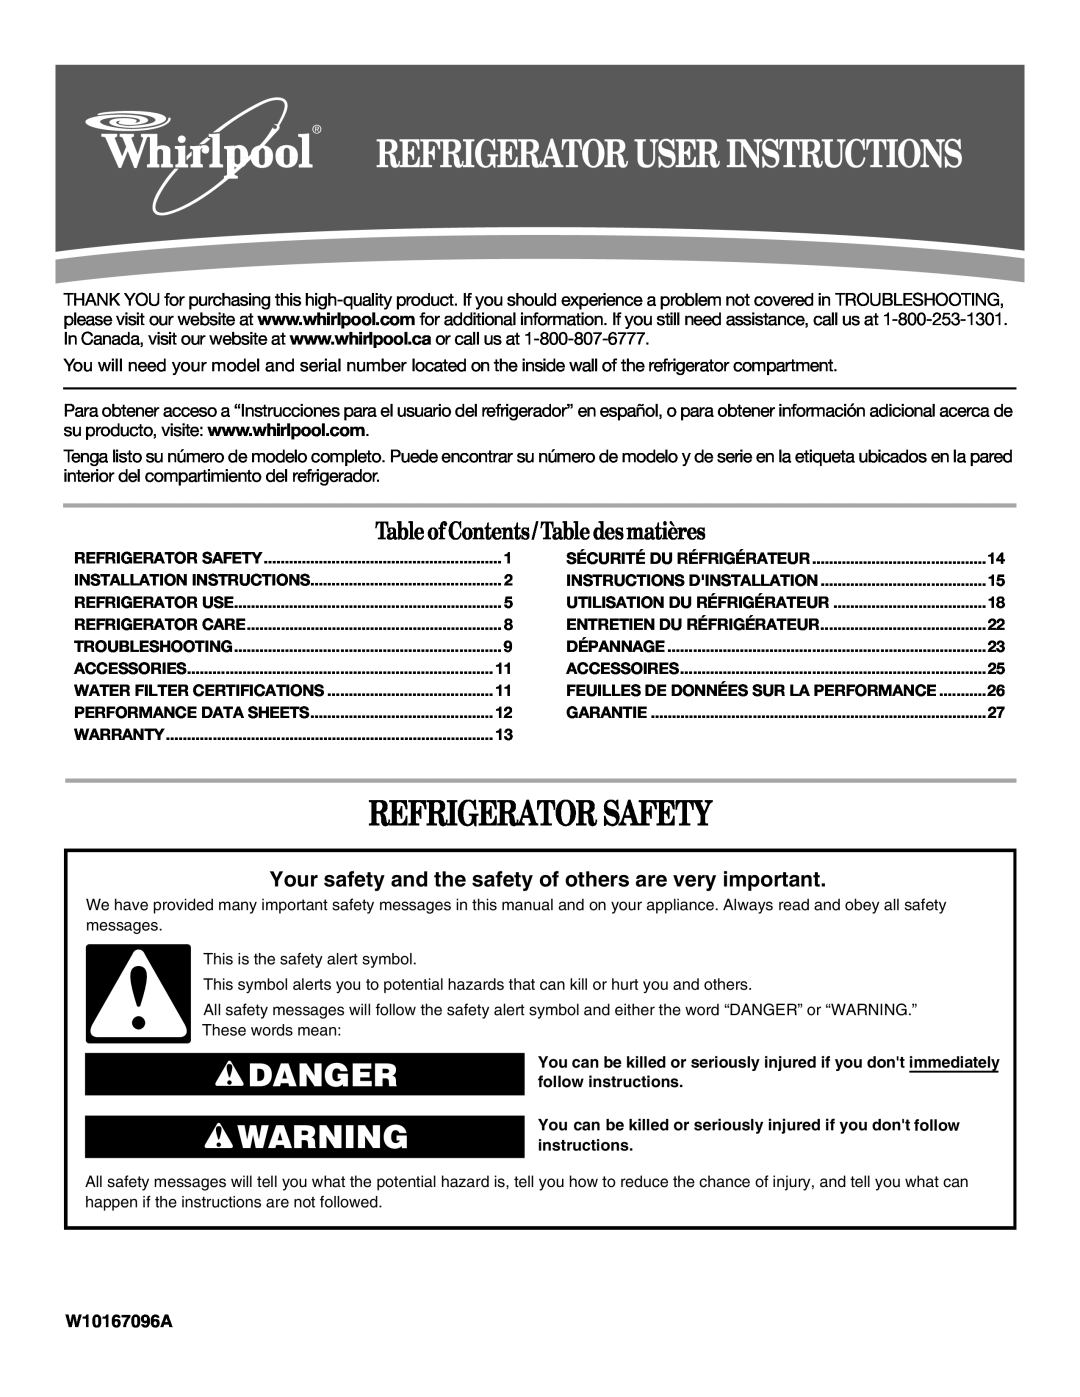 Whirlpool ED2KHAXV installation instructions Refrigerator Safety, Danger, Table of Contents / Table desmatières 